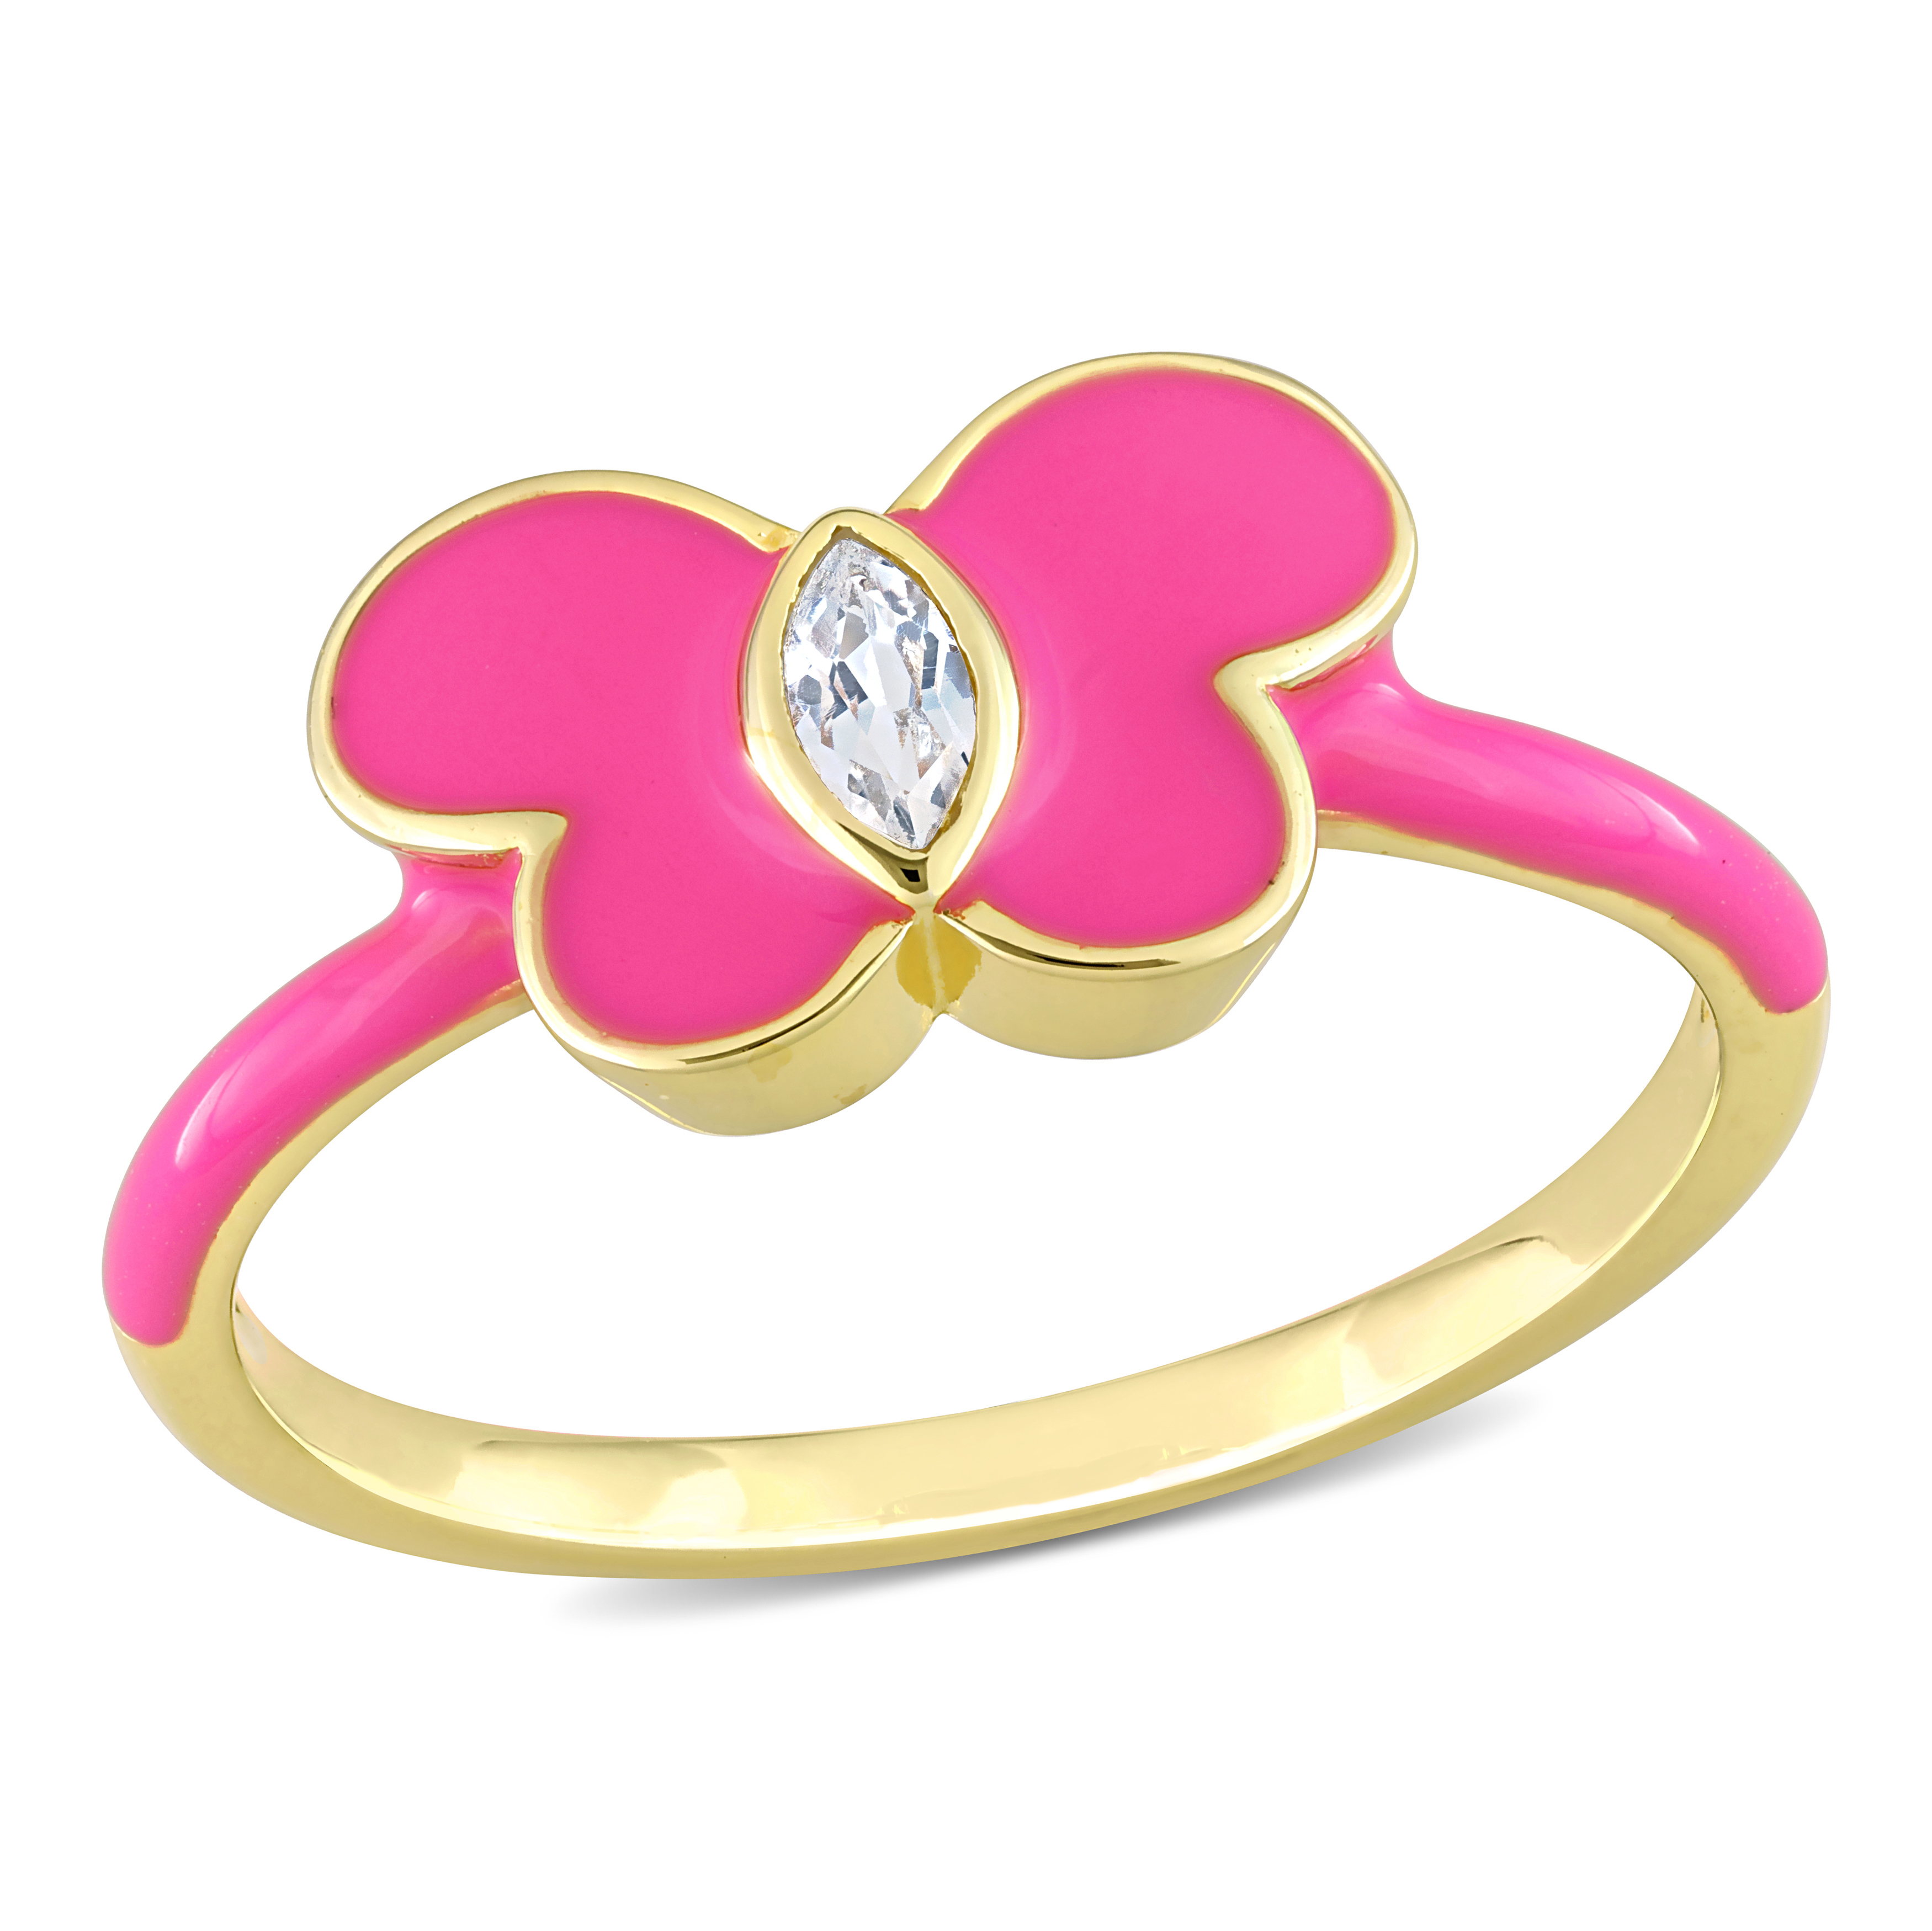 1/8 CT TGW Created White Sapphire Pink Enamel Butterfly Ring in Yellow Plated Sterling Silver